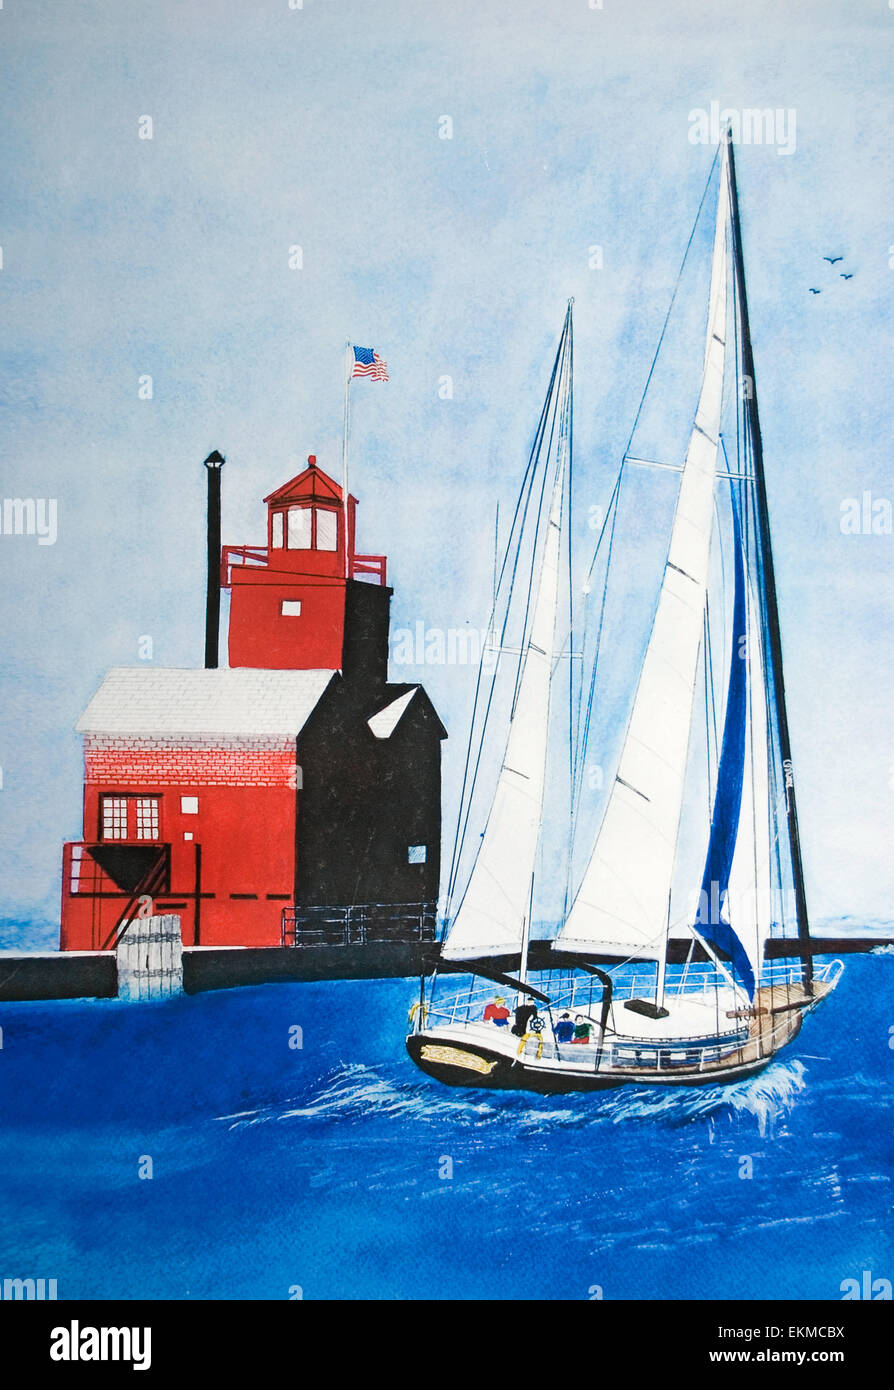 Watercolor painting of sailboat with red lighthouse. Stock Photo